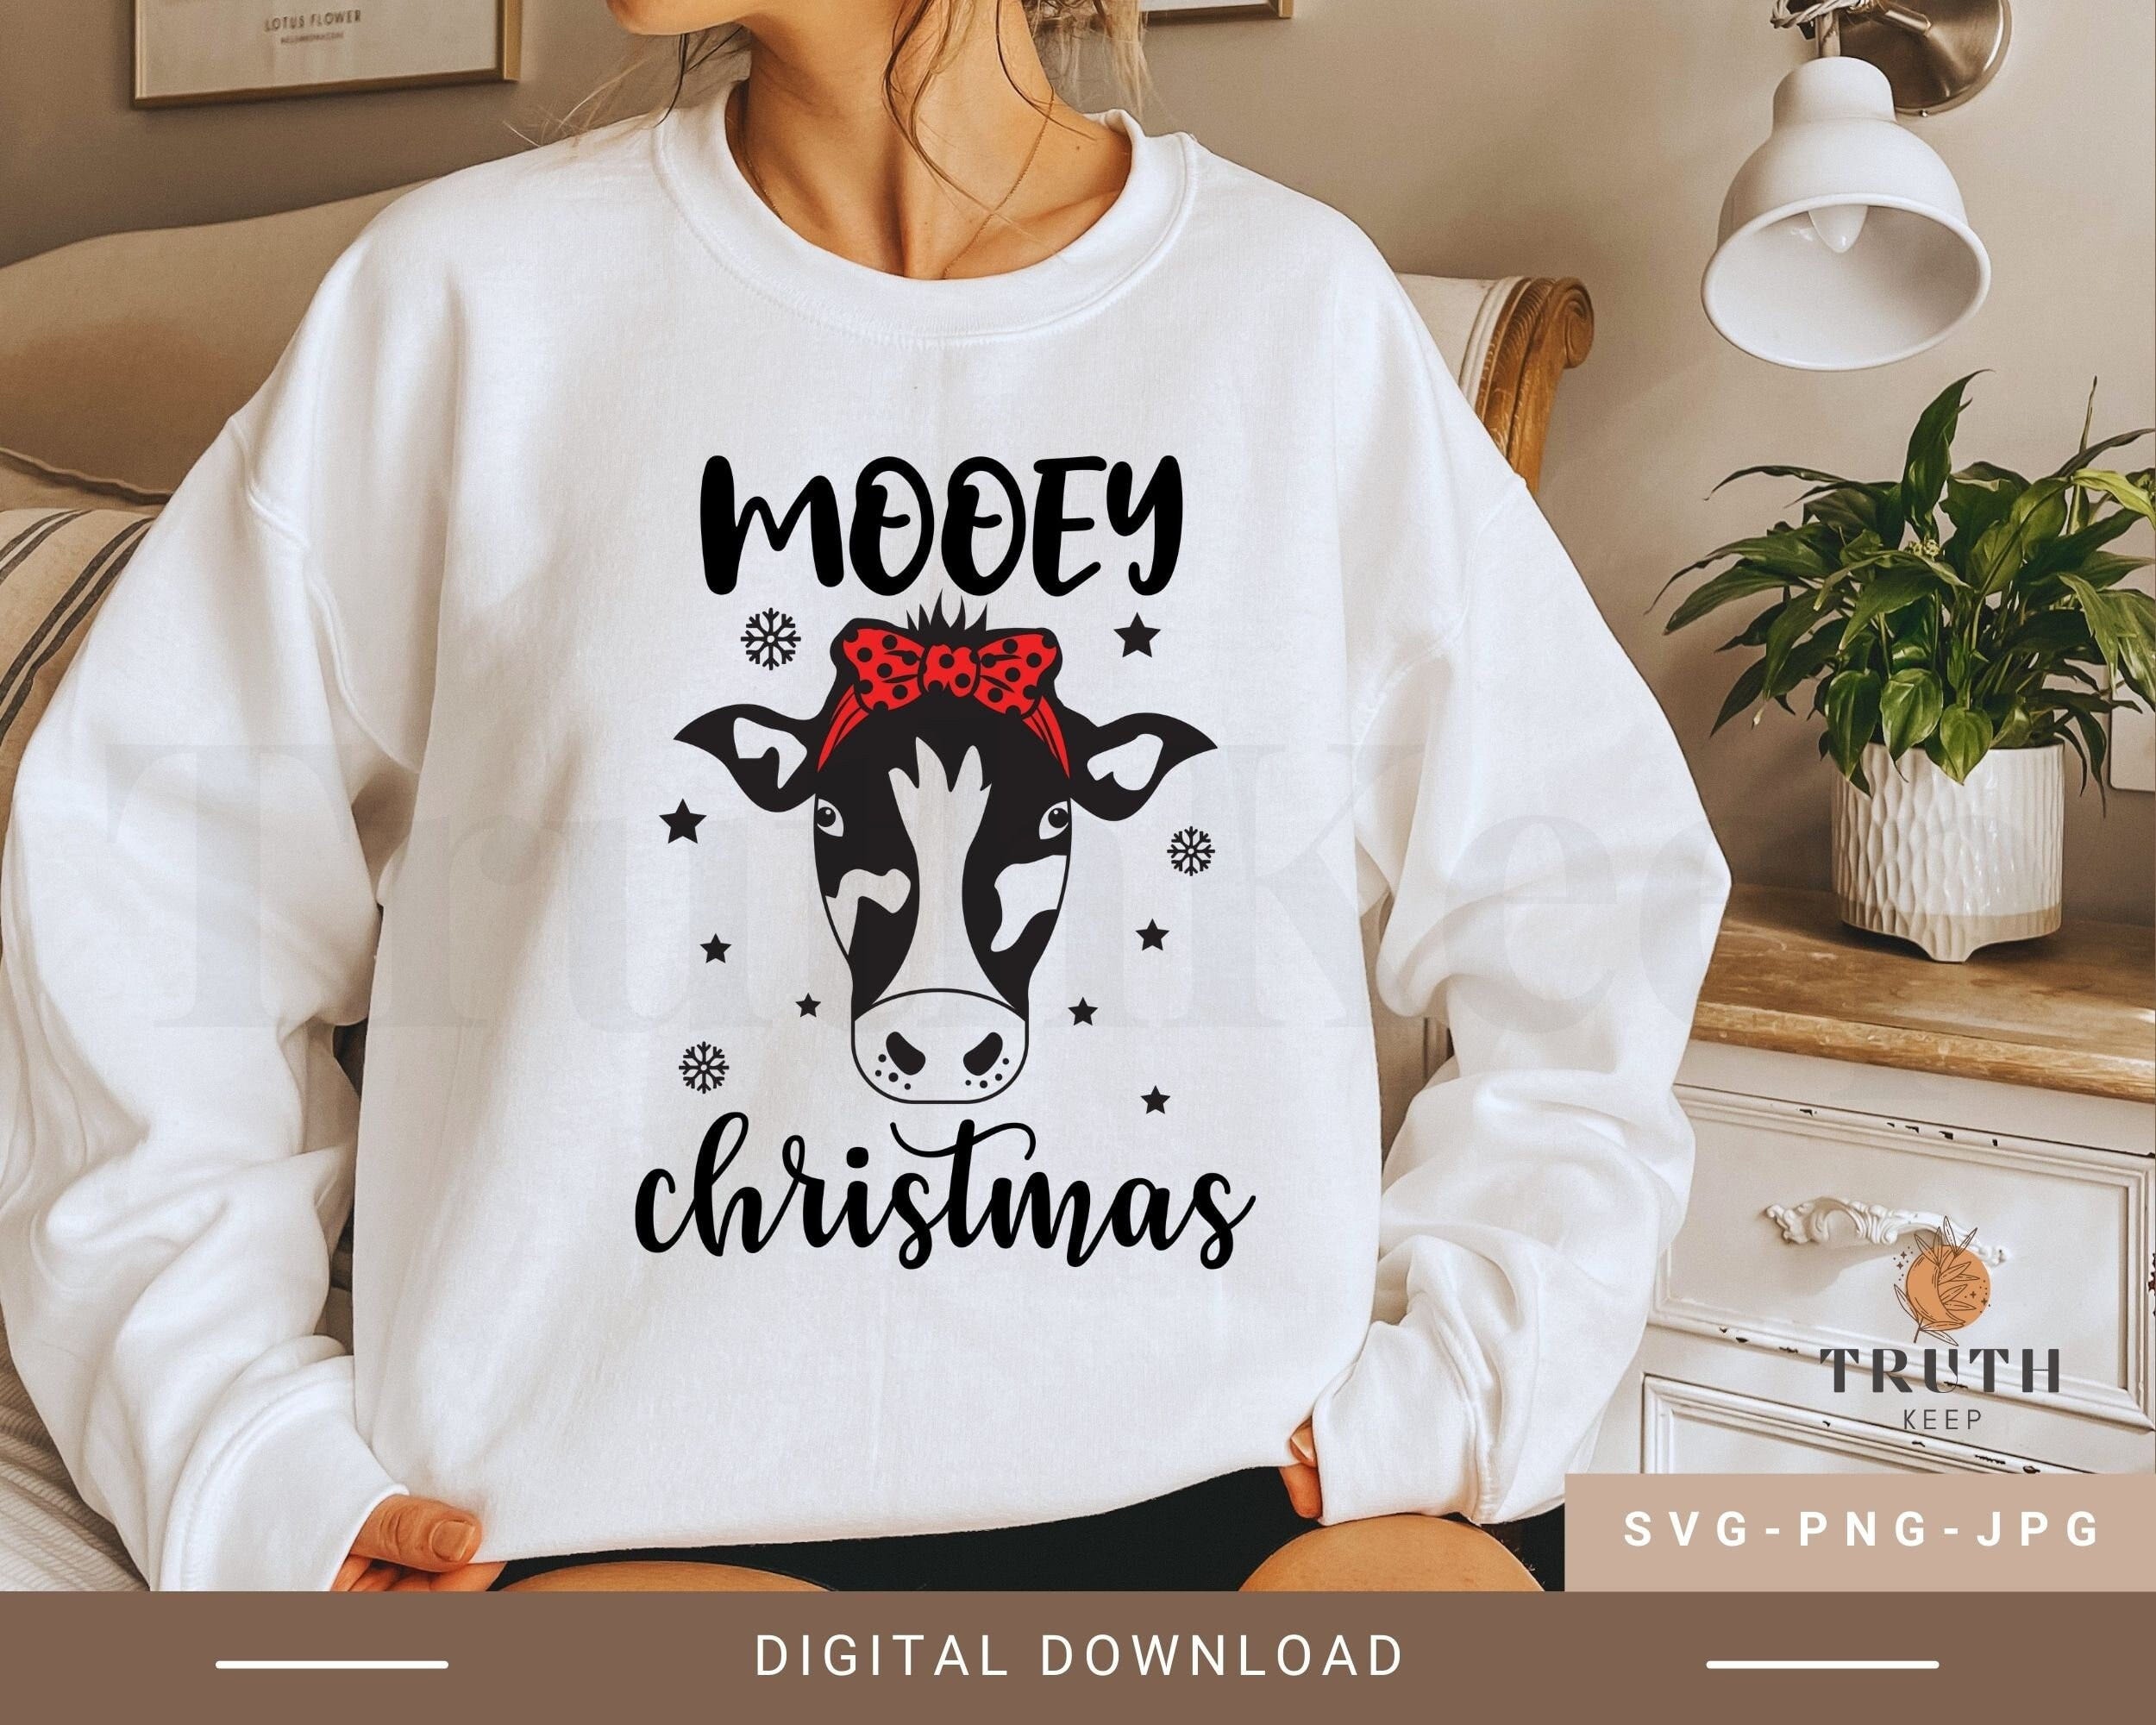 Mooey Christmas svg, Christmas cow svg shirt,Cow heifer with bow, farmhouse christmas,Coffee Mug svg,png file for cricut,Instant Download.